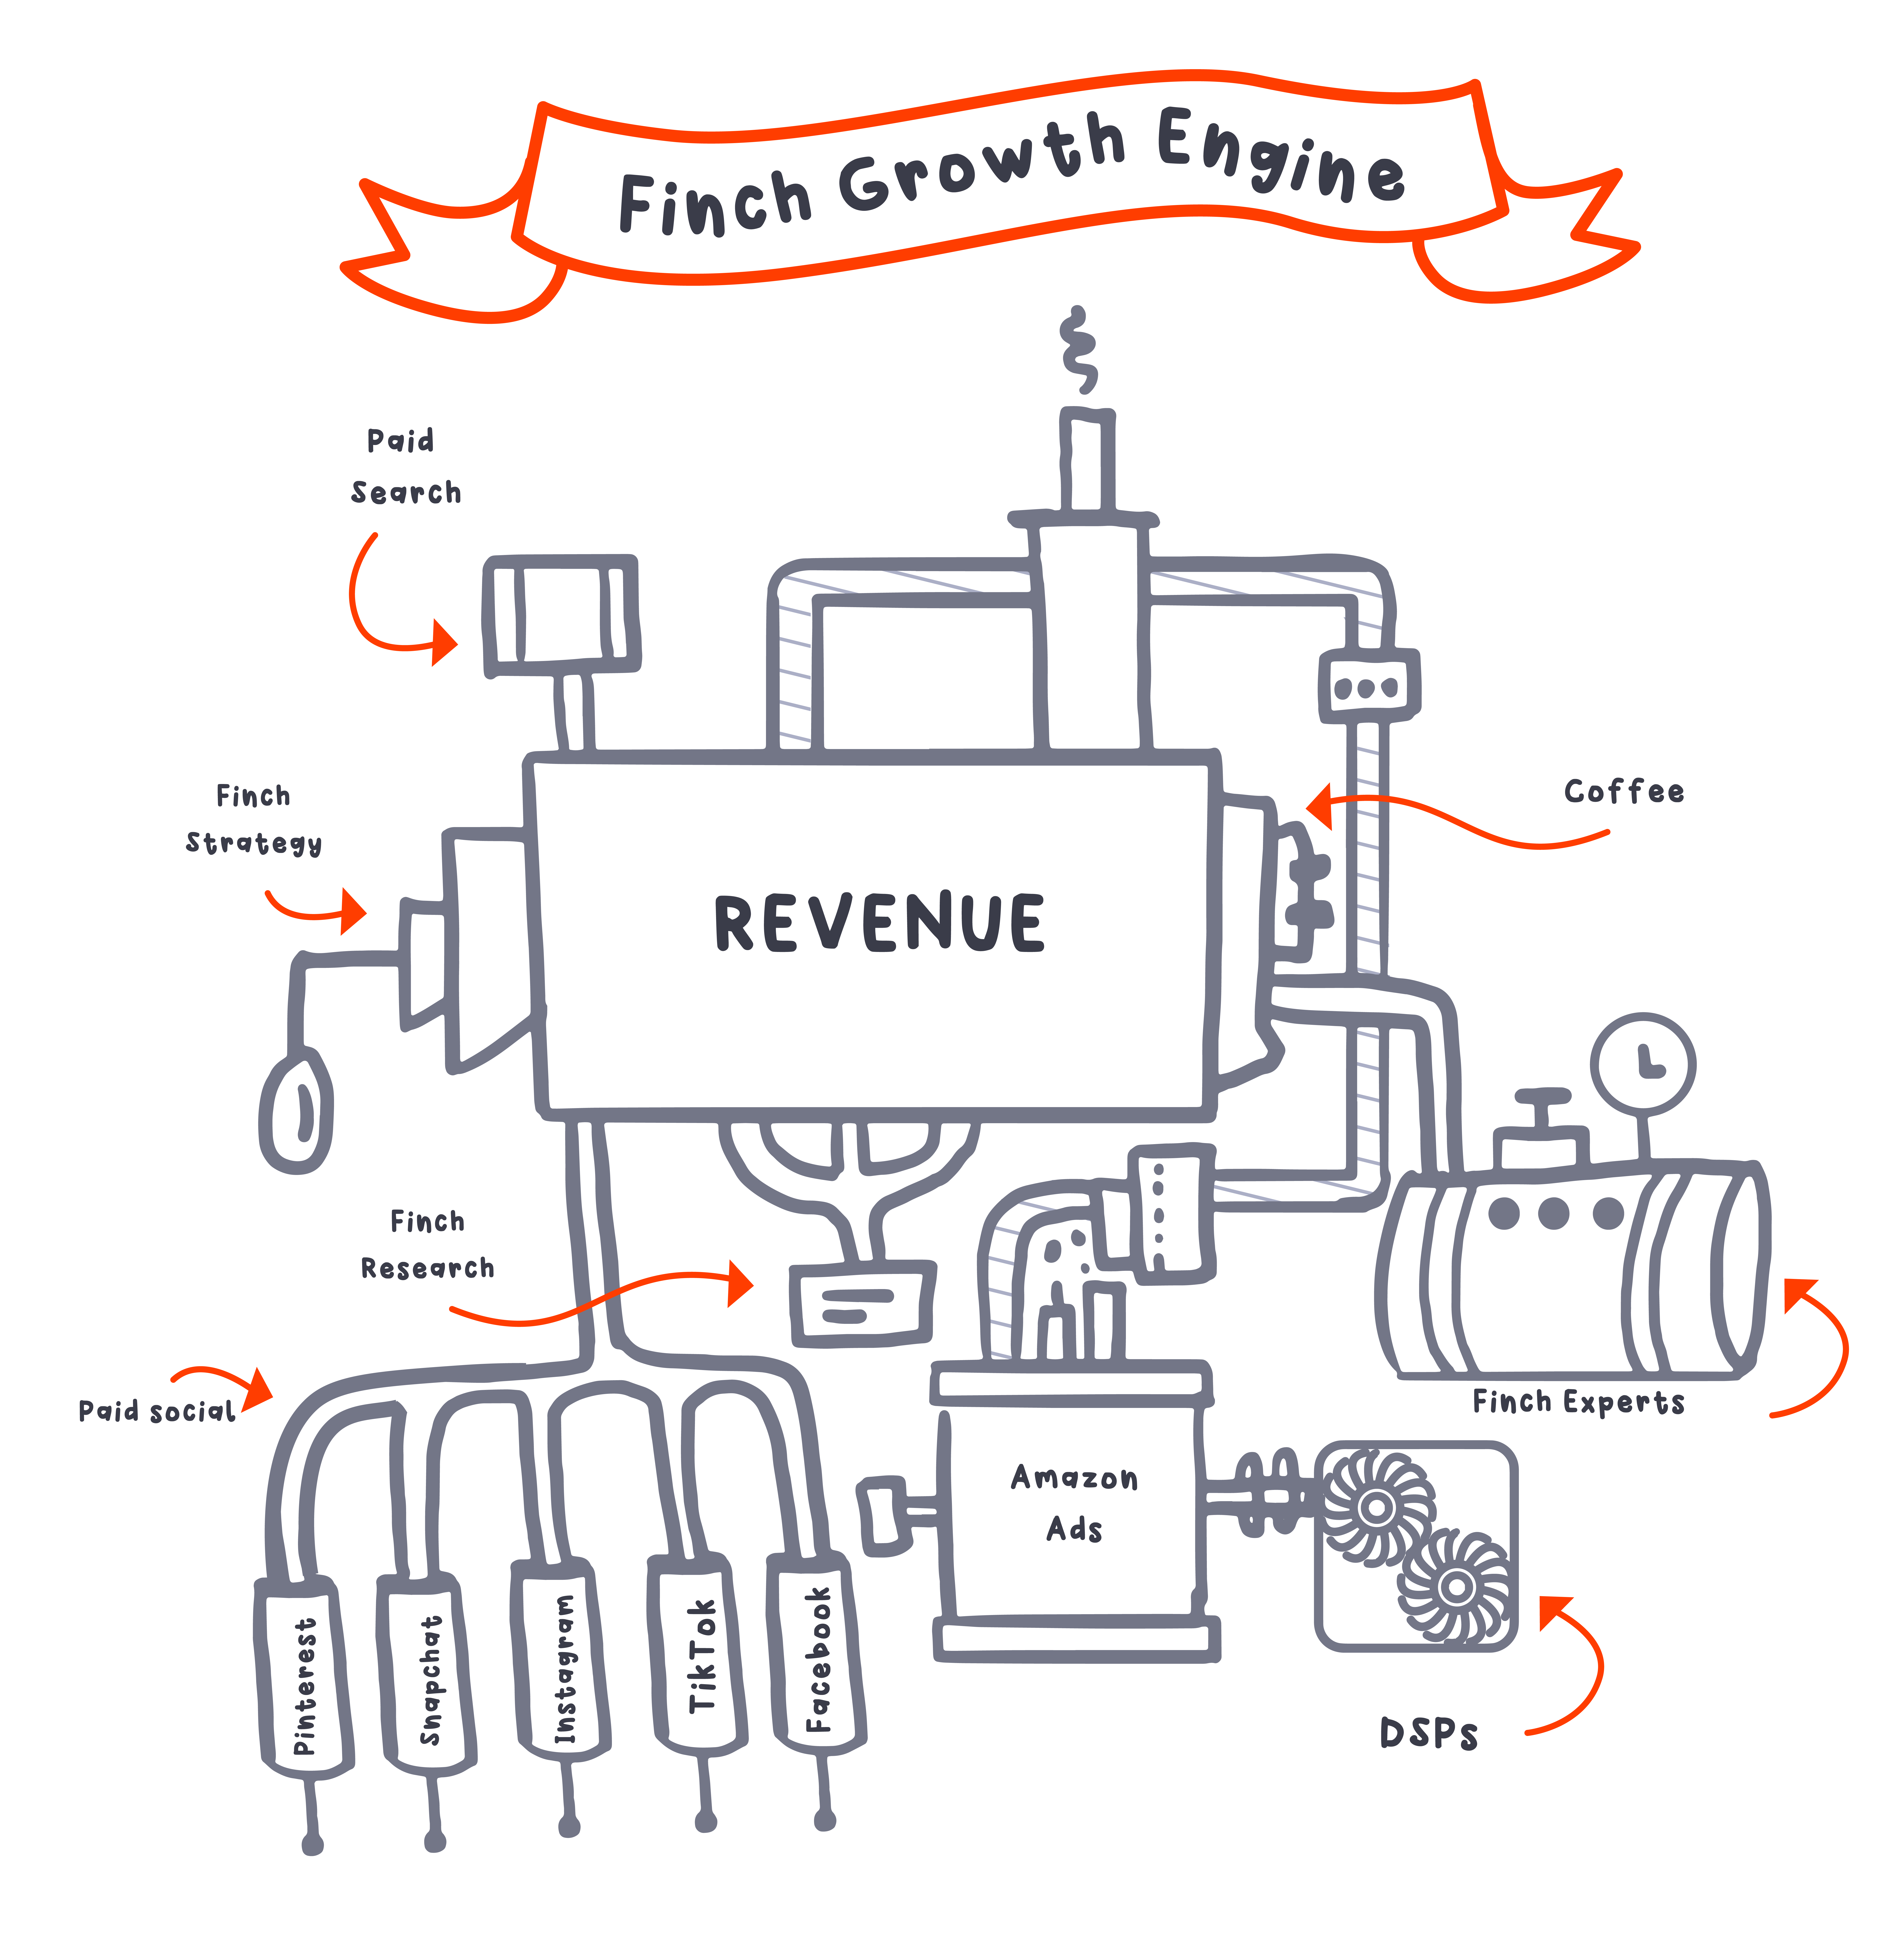 Finch Growth Engine illustration-infographic-1